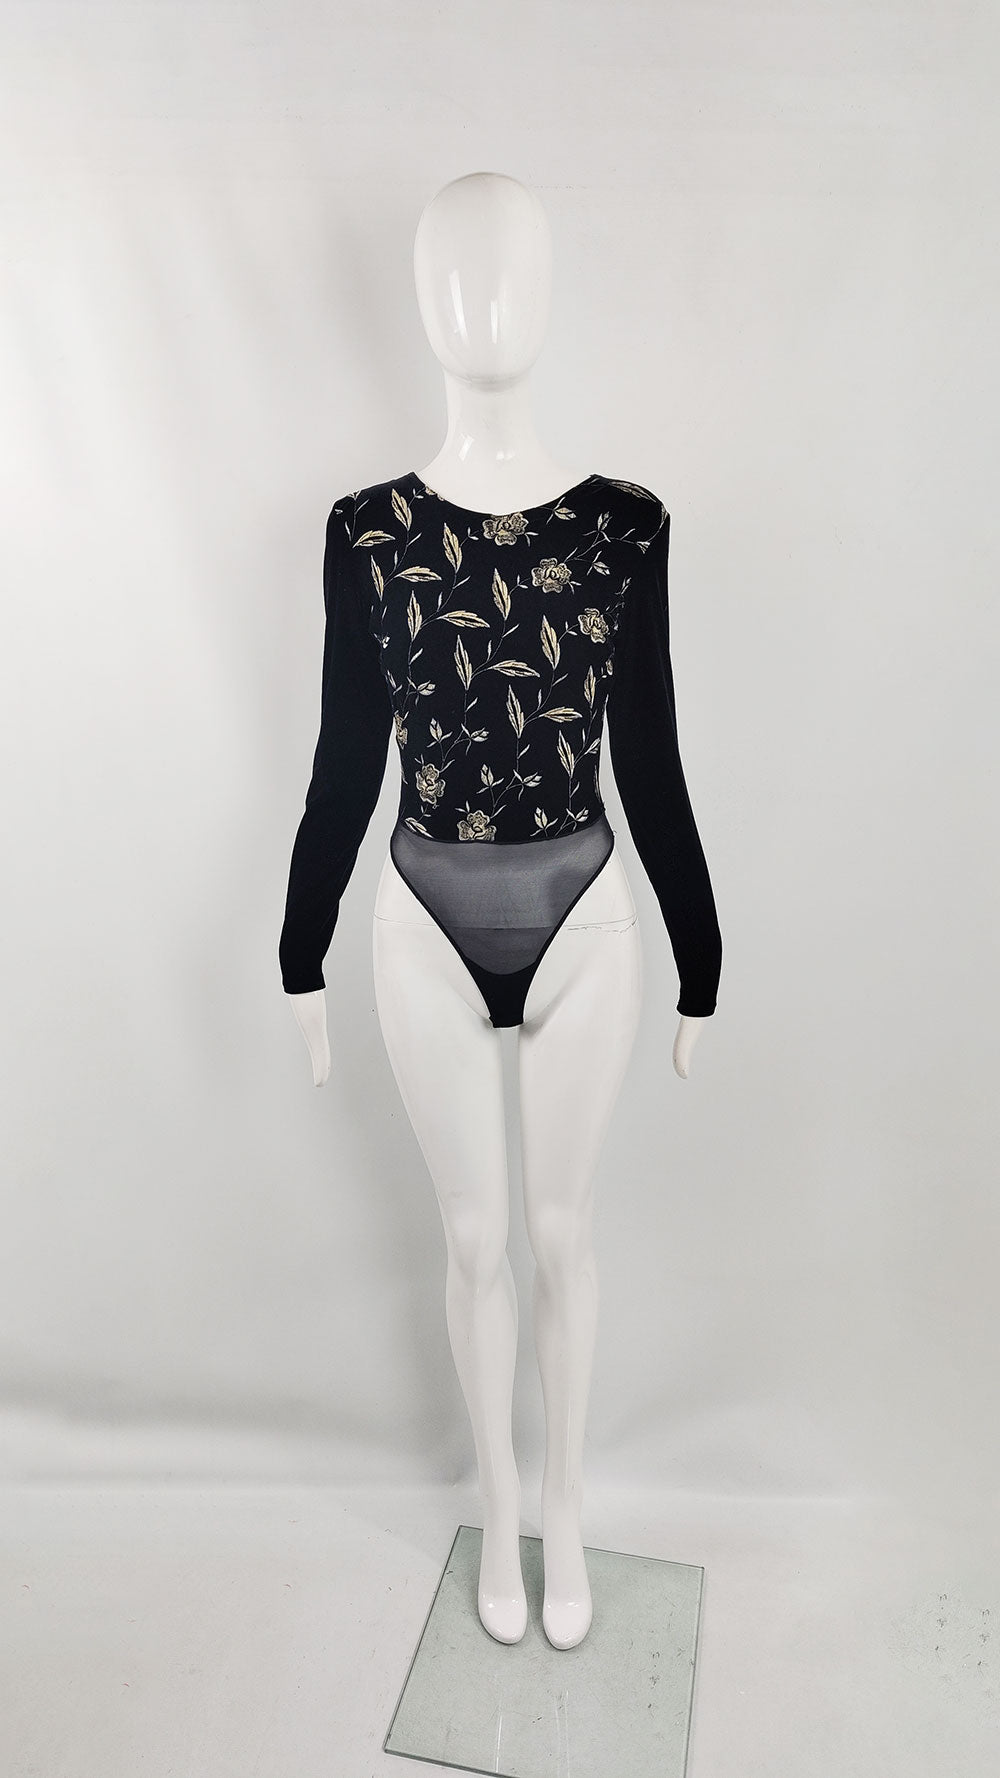 An image of a vintage bodysuit from the 90s by French label, Sagaie. It has long sleeves and an embroidered front - meant for a party.